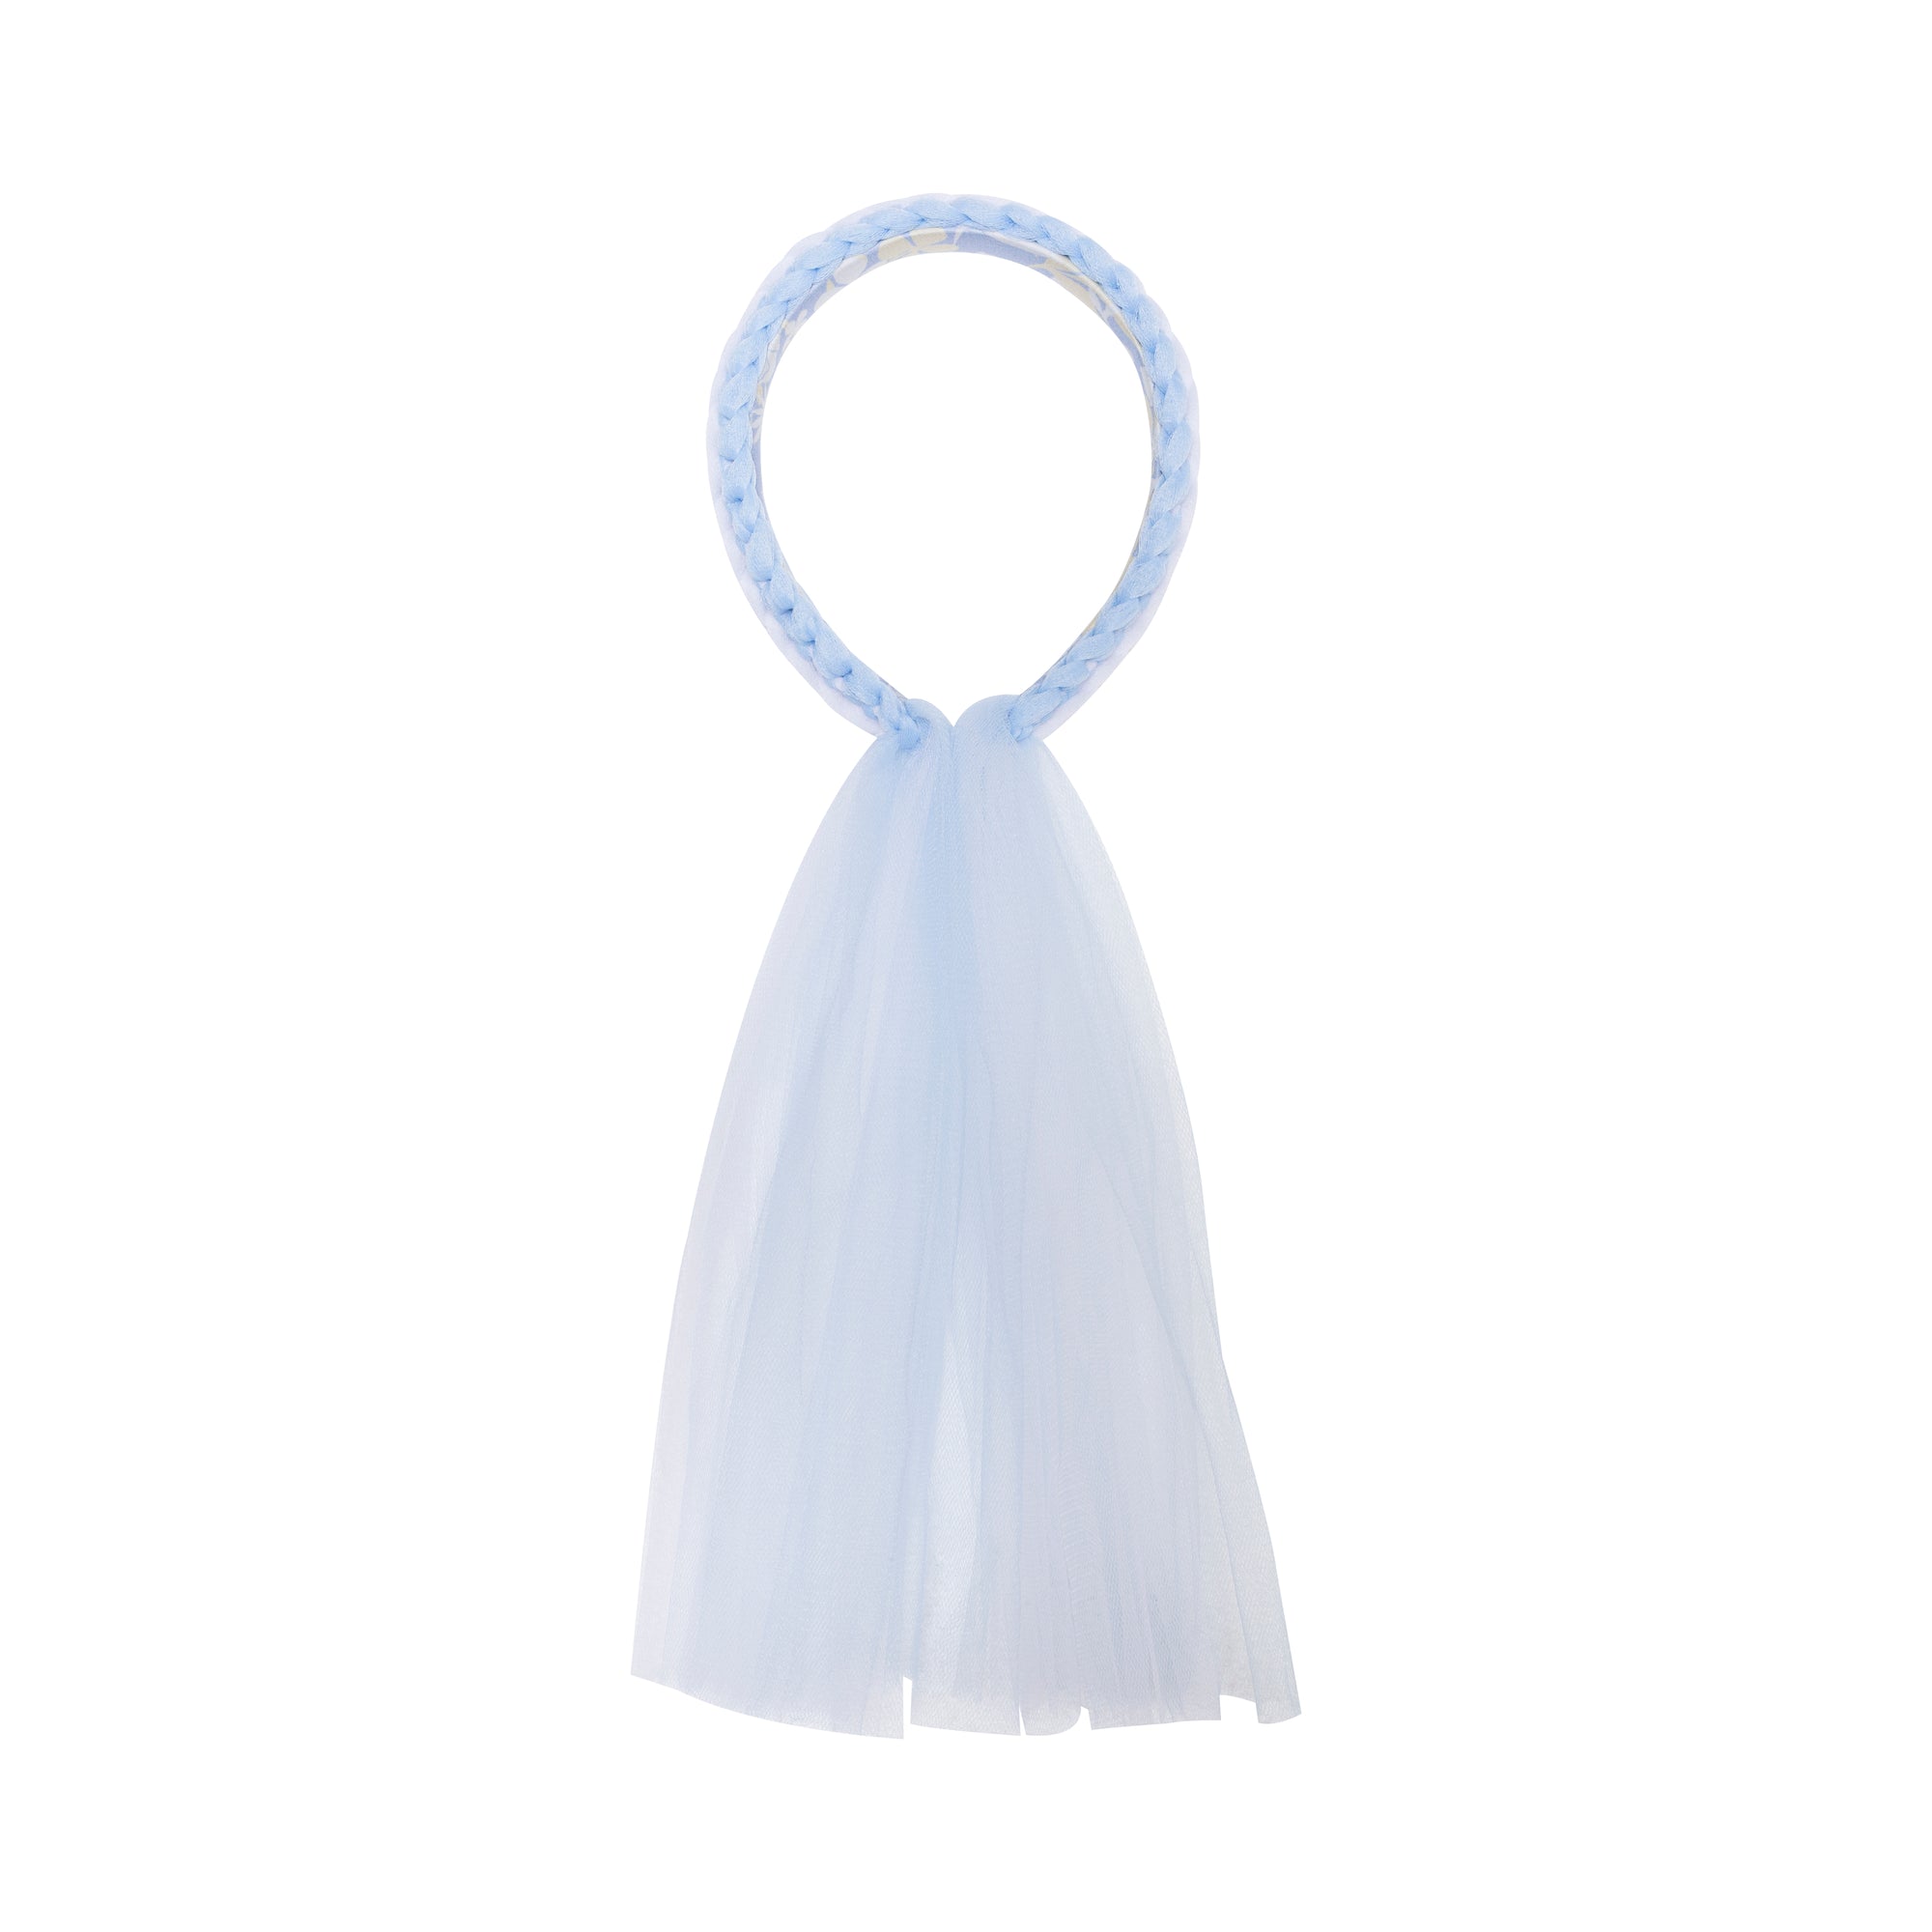 Blue Tulle Head Band